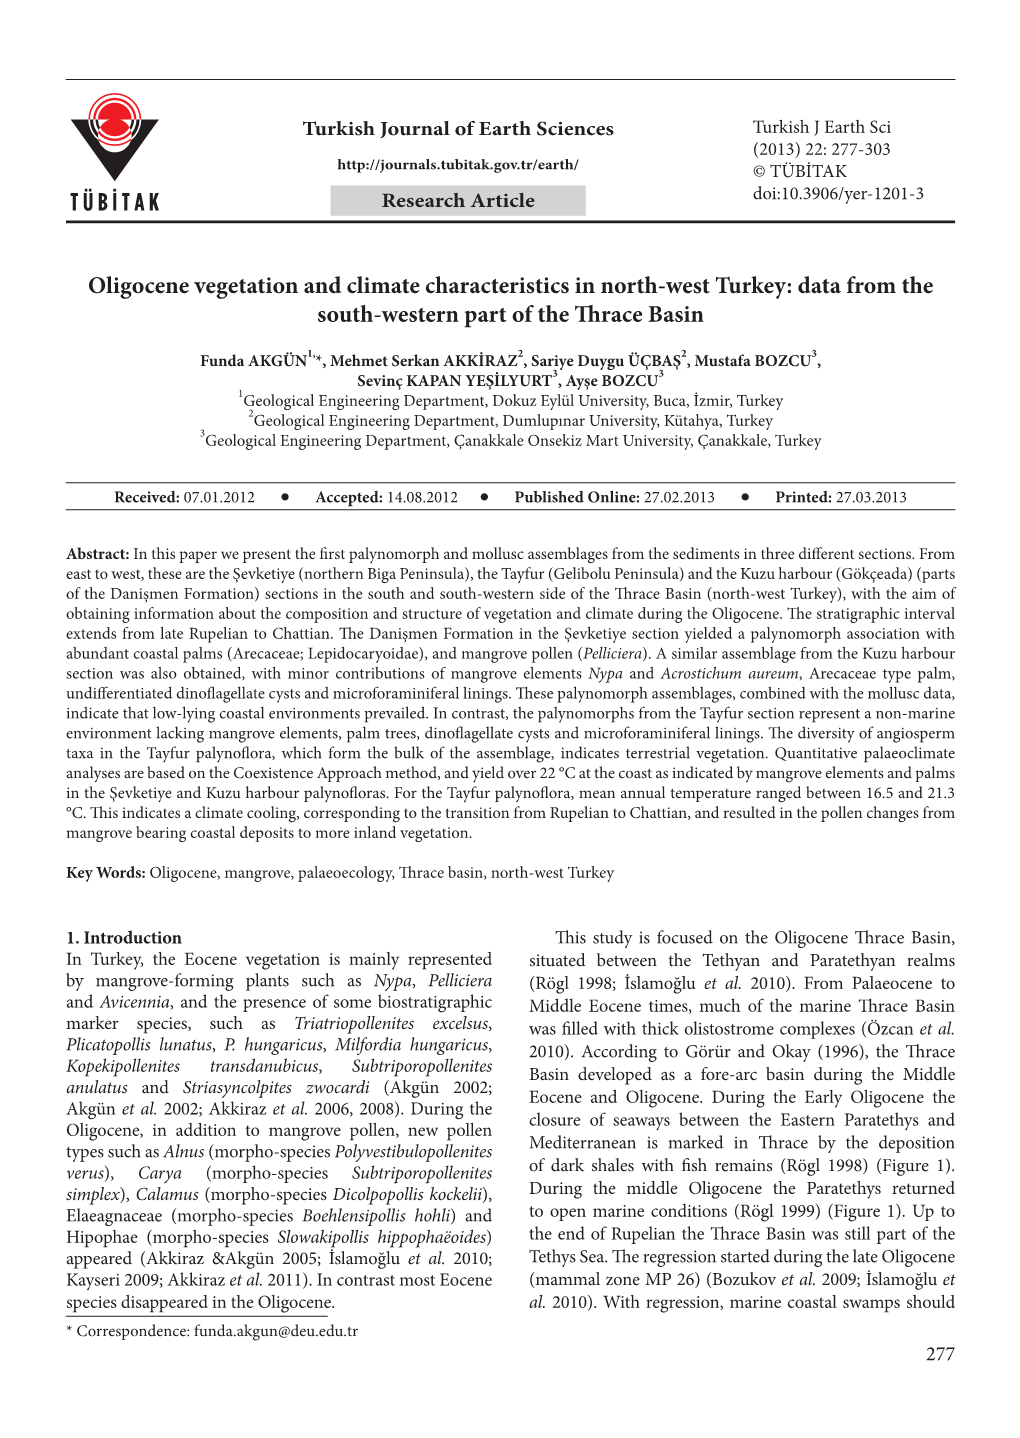 Oligocene Vegetation and Climate Characteristics in North-West Turkey: Data from the South-Western Part of the Thrace Basin